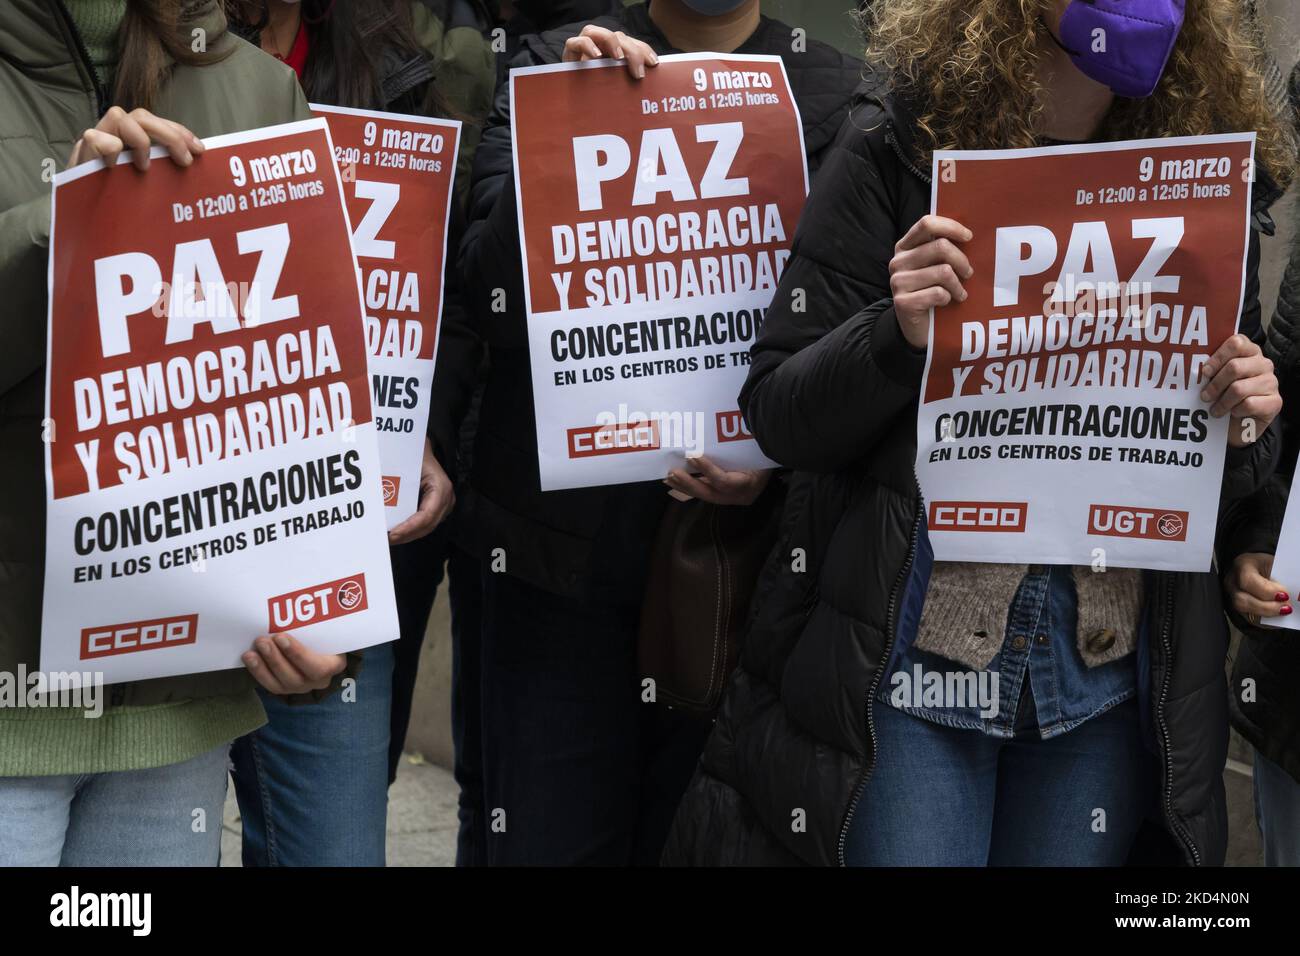 Detail of the banners calling for peace, democracy and solidarity carried by participants in the silent concentration in Santander (Spain) called by the majority unions CCOO (Workers' Commissions) and UGT (General Union of Workers) to protest against the war in Ukraine, in Santander, Spain, on March 09, 2022. (Photo by Joaquin Gomez Sastre/NurPhoto) Stock Photo